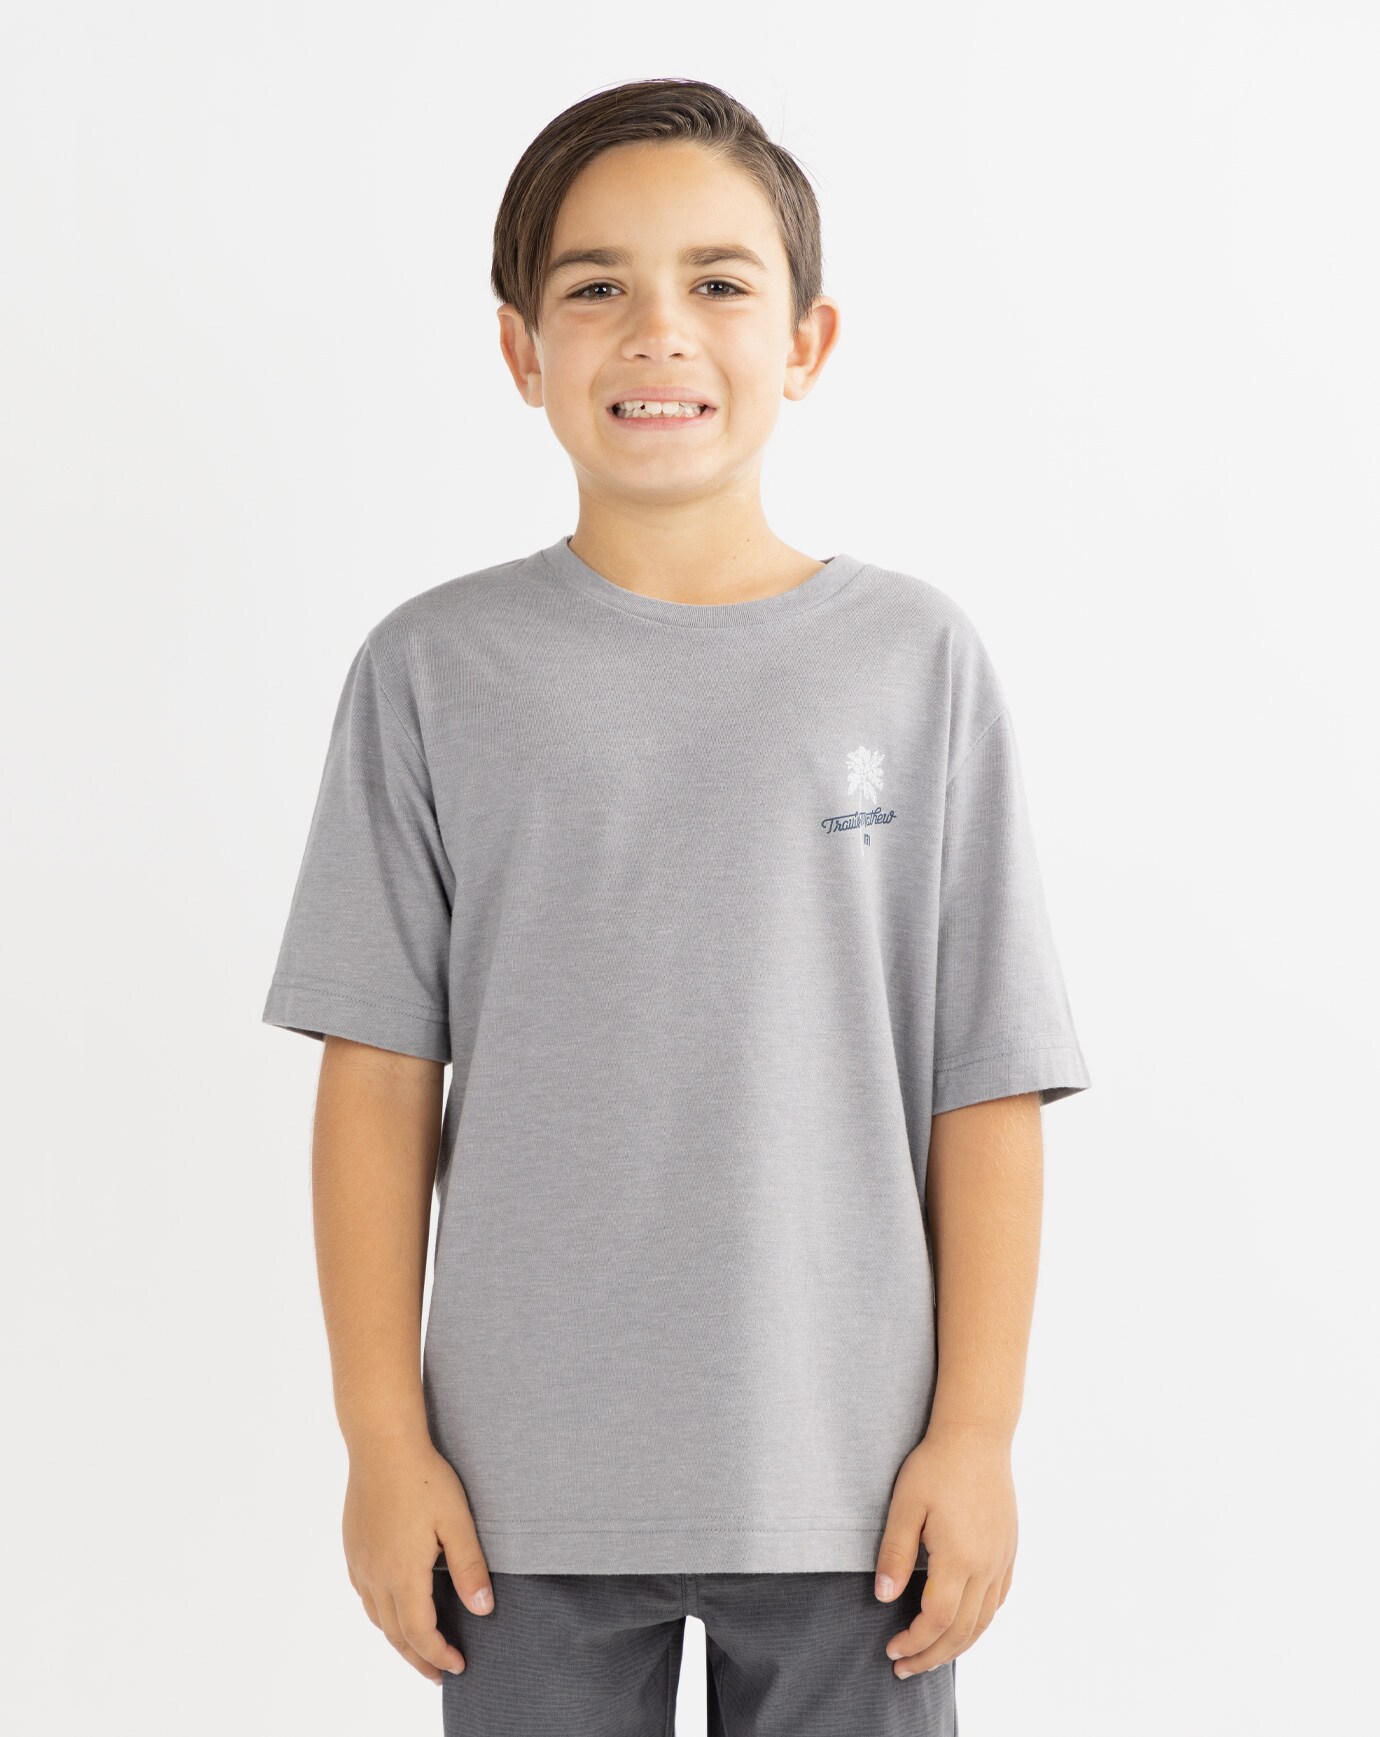 SCENIC OVERLOOK YOUTH T-SHIRT